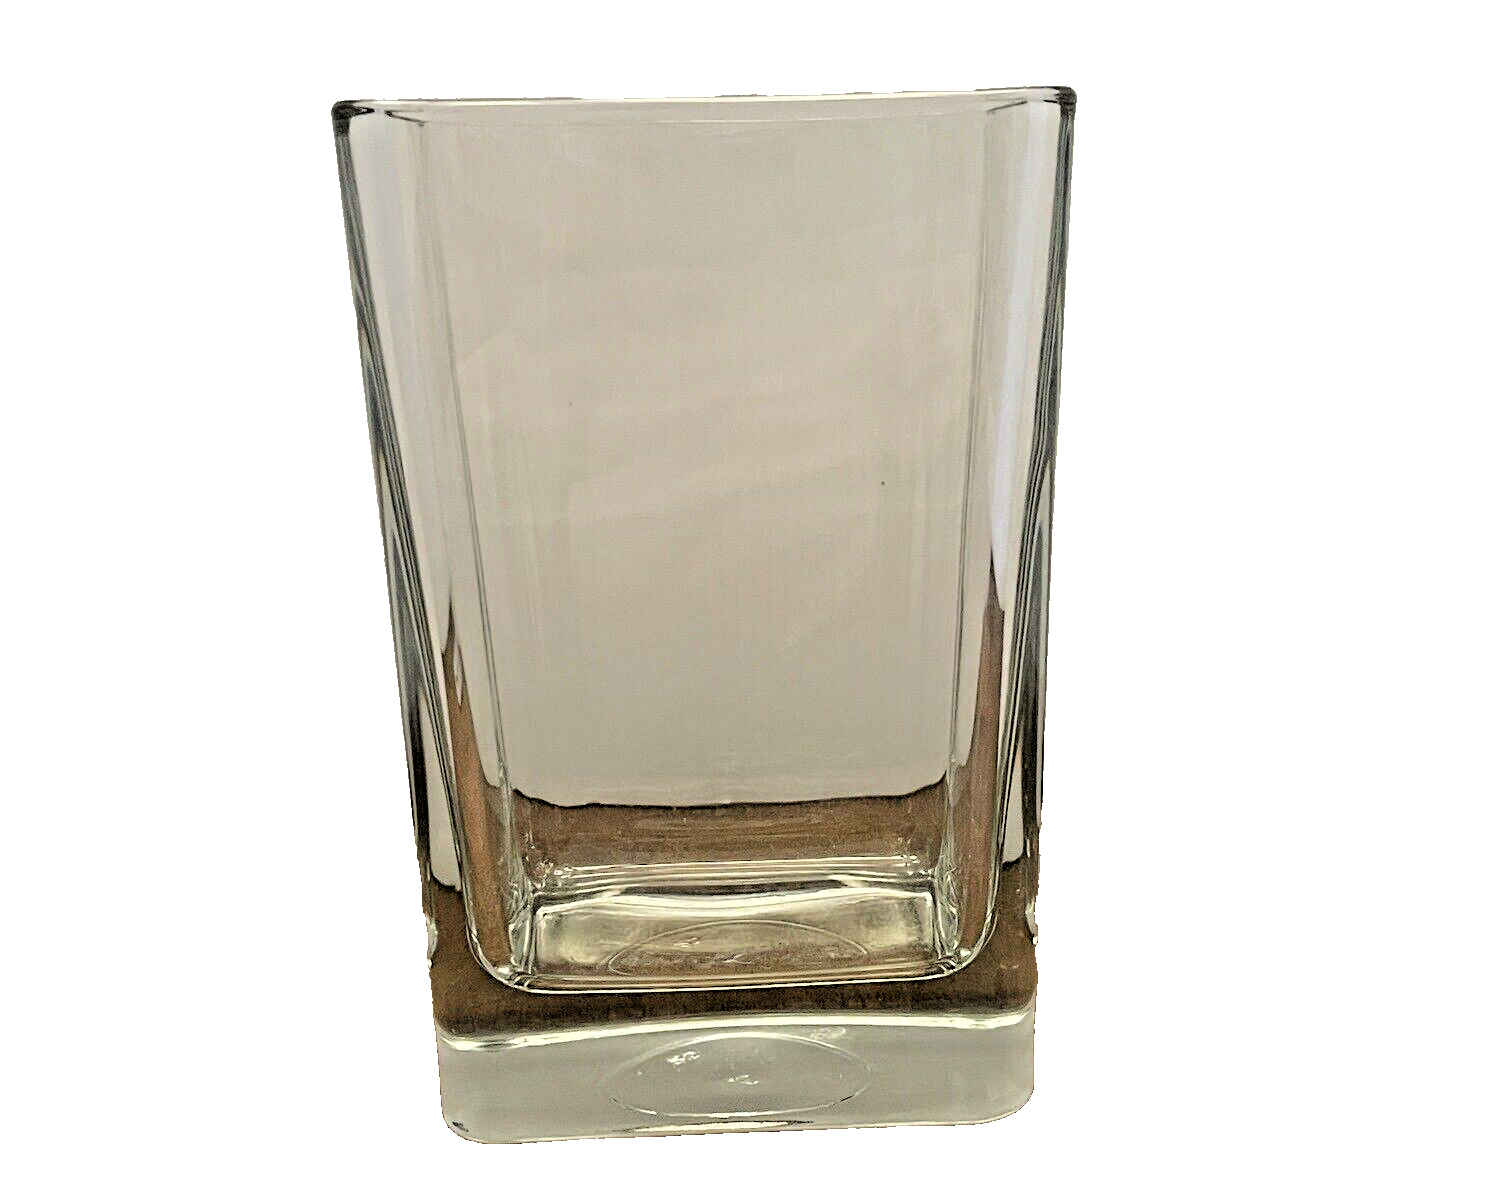 Vase Libbey Glass Rectangle Clear Flower Home Decor 6 x 4 x 3 Inch Heavy - $18.55